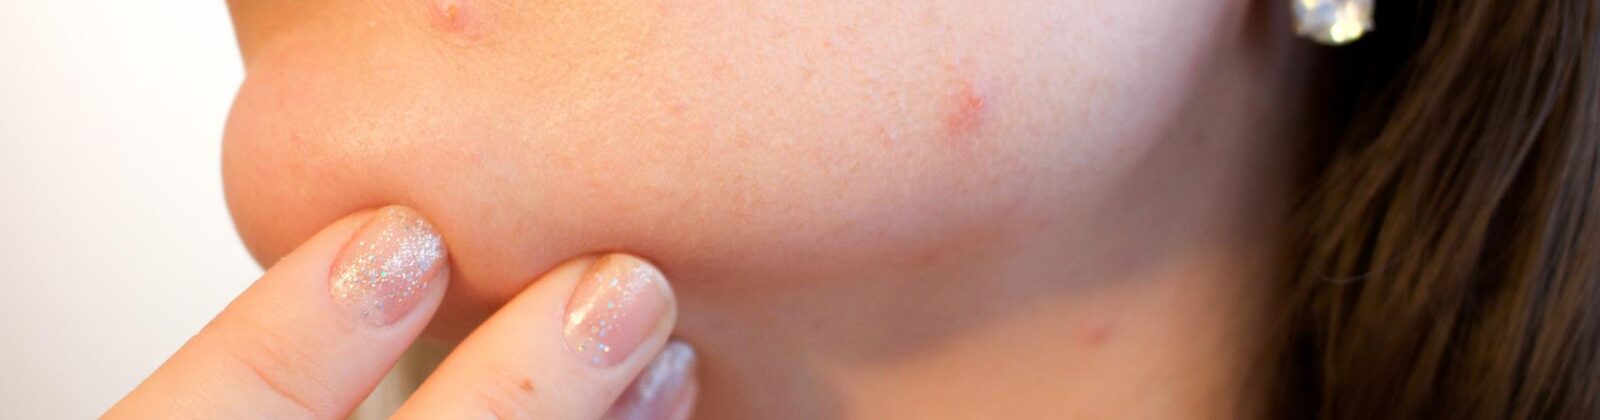 persons chin and lips showing acne. hand placed on chin